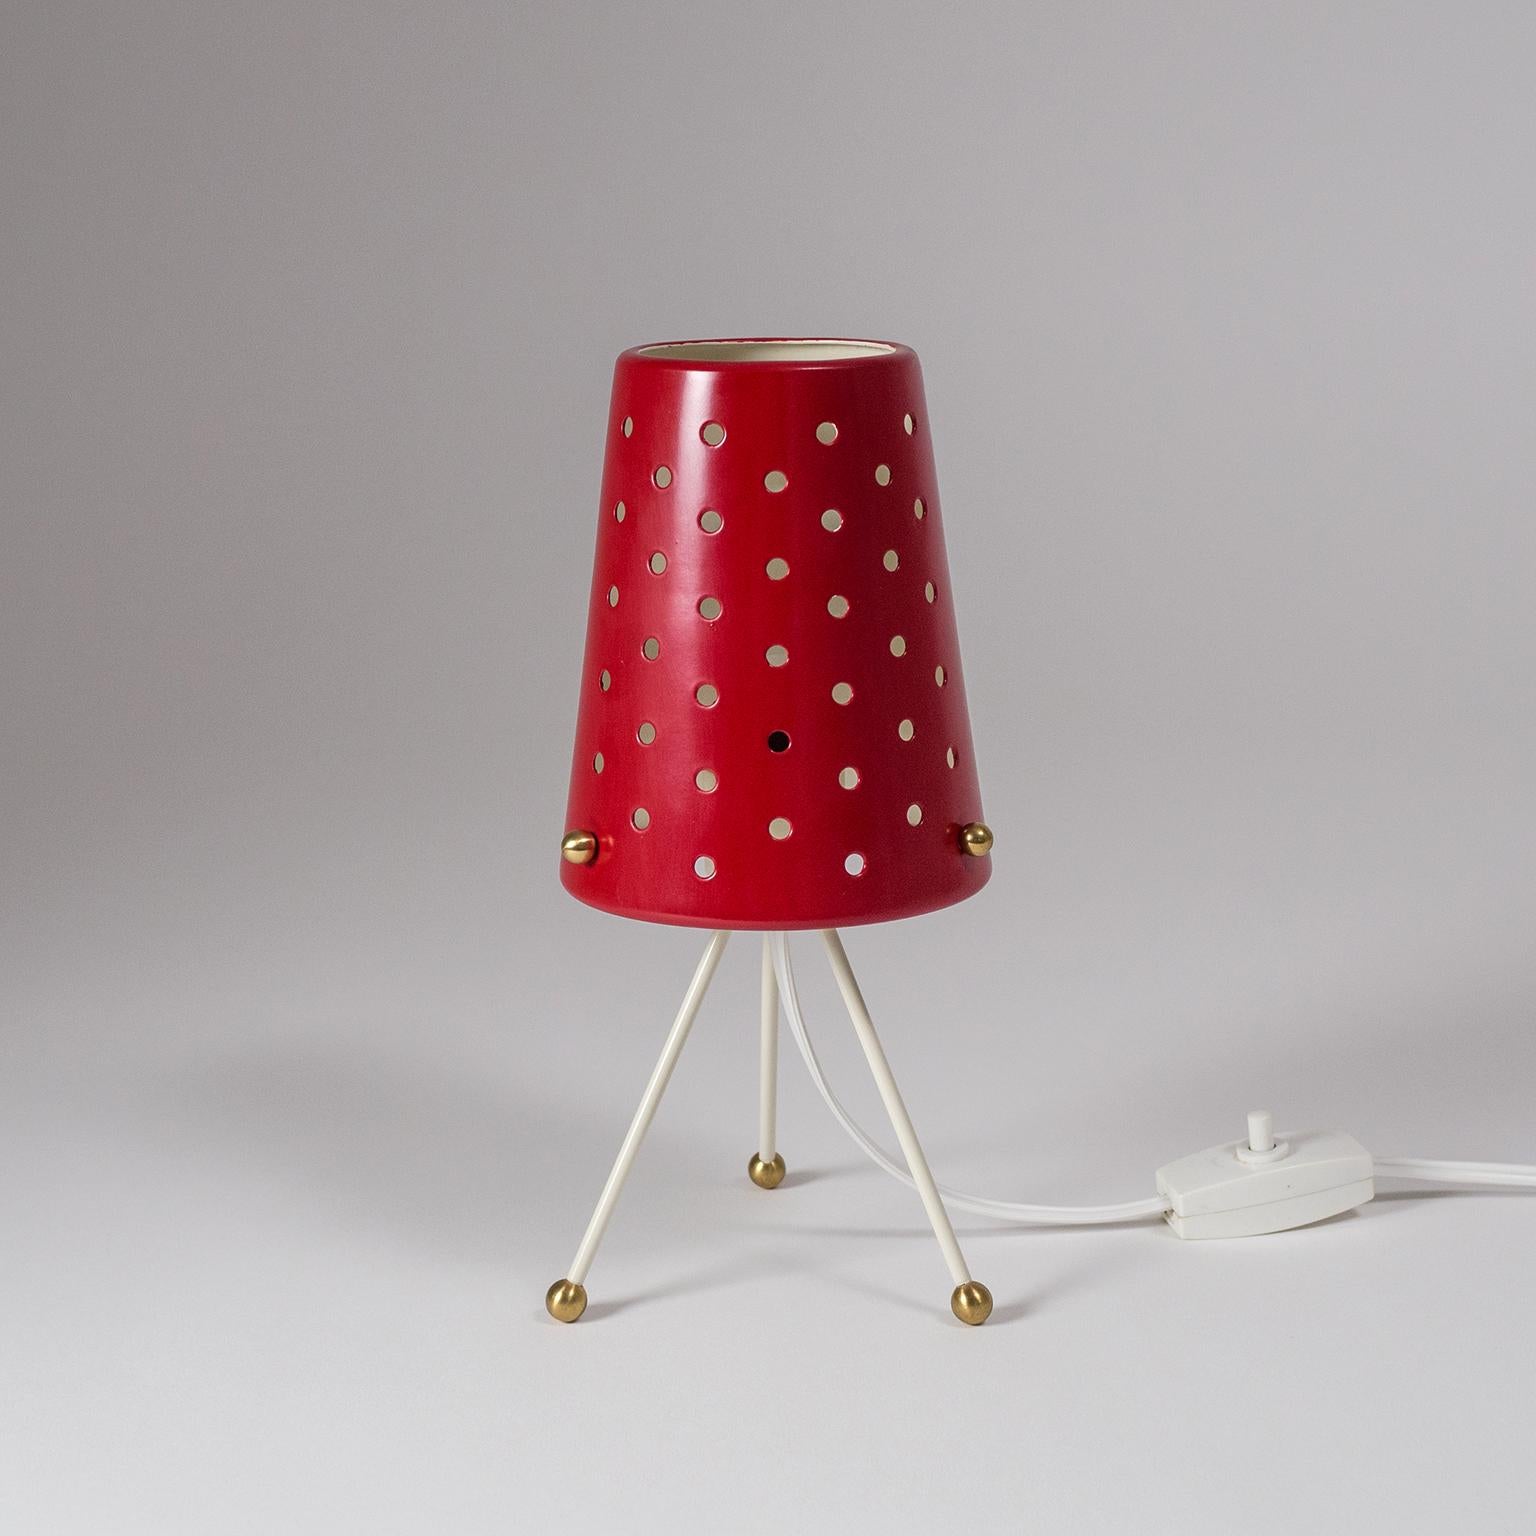 Mid-Century Modern Table Lamp with Pierced Red Shade and Brass Details, 1950s